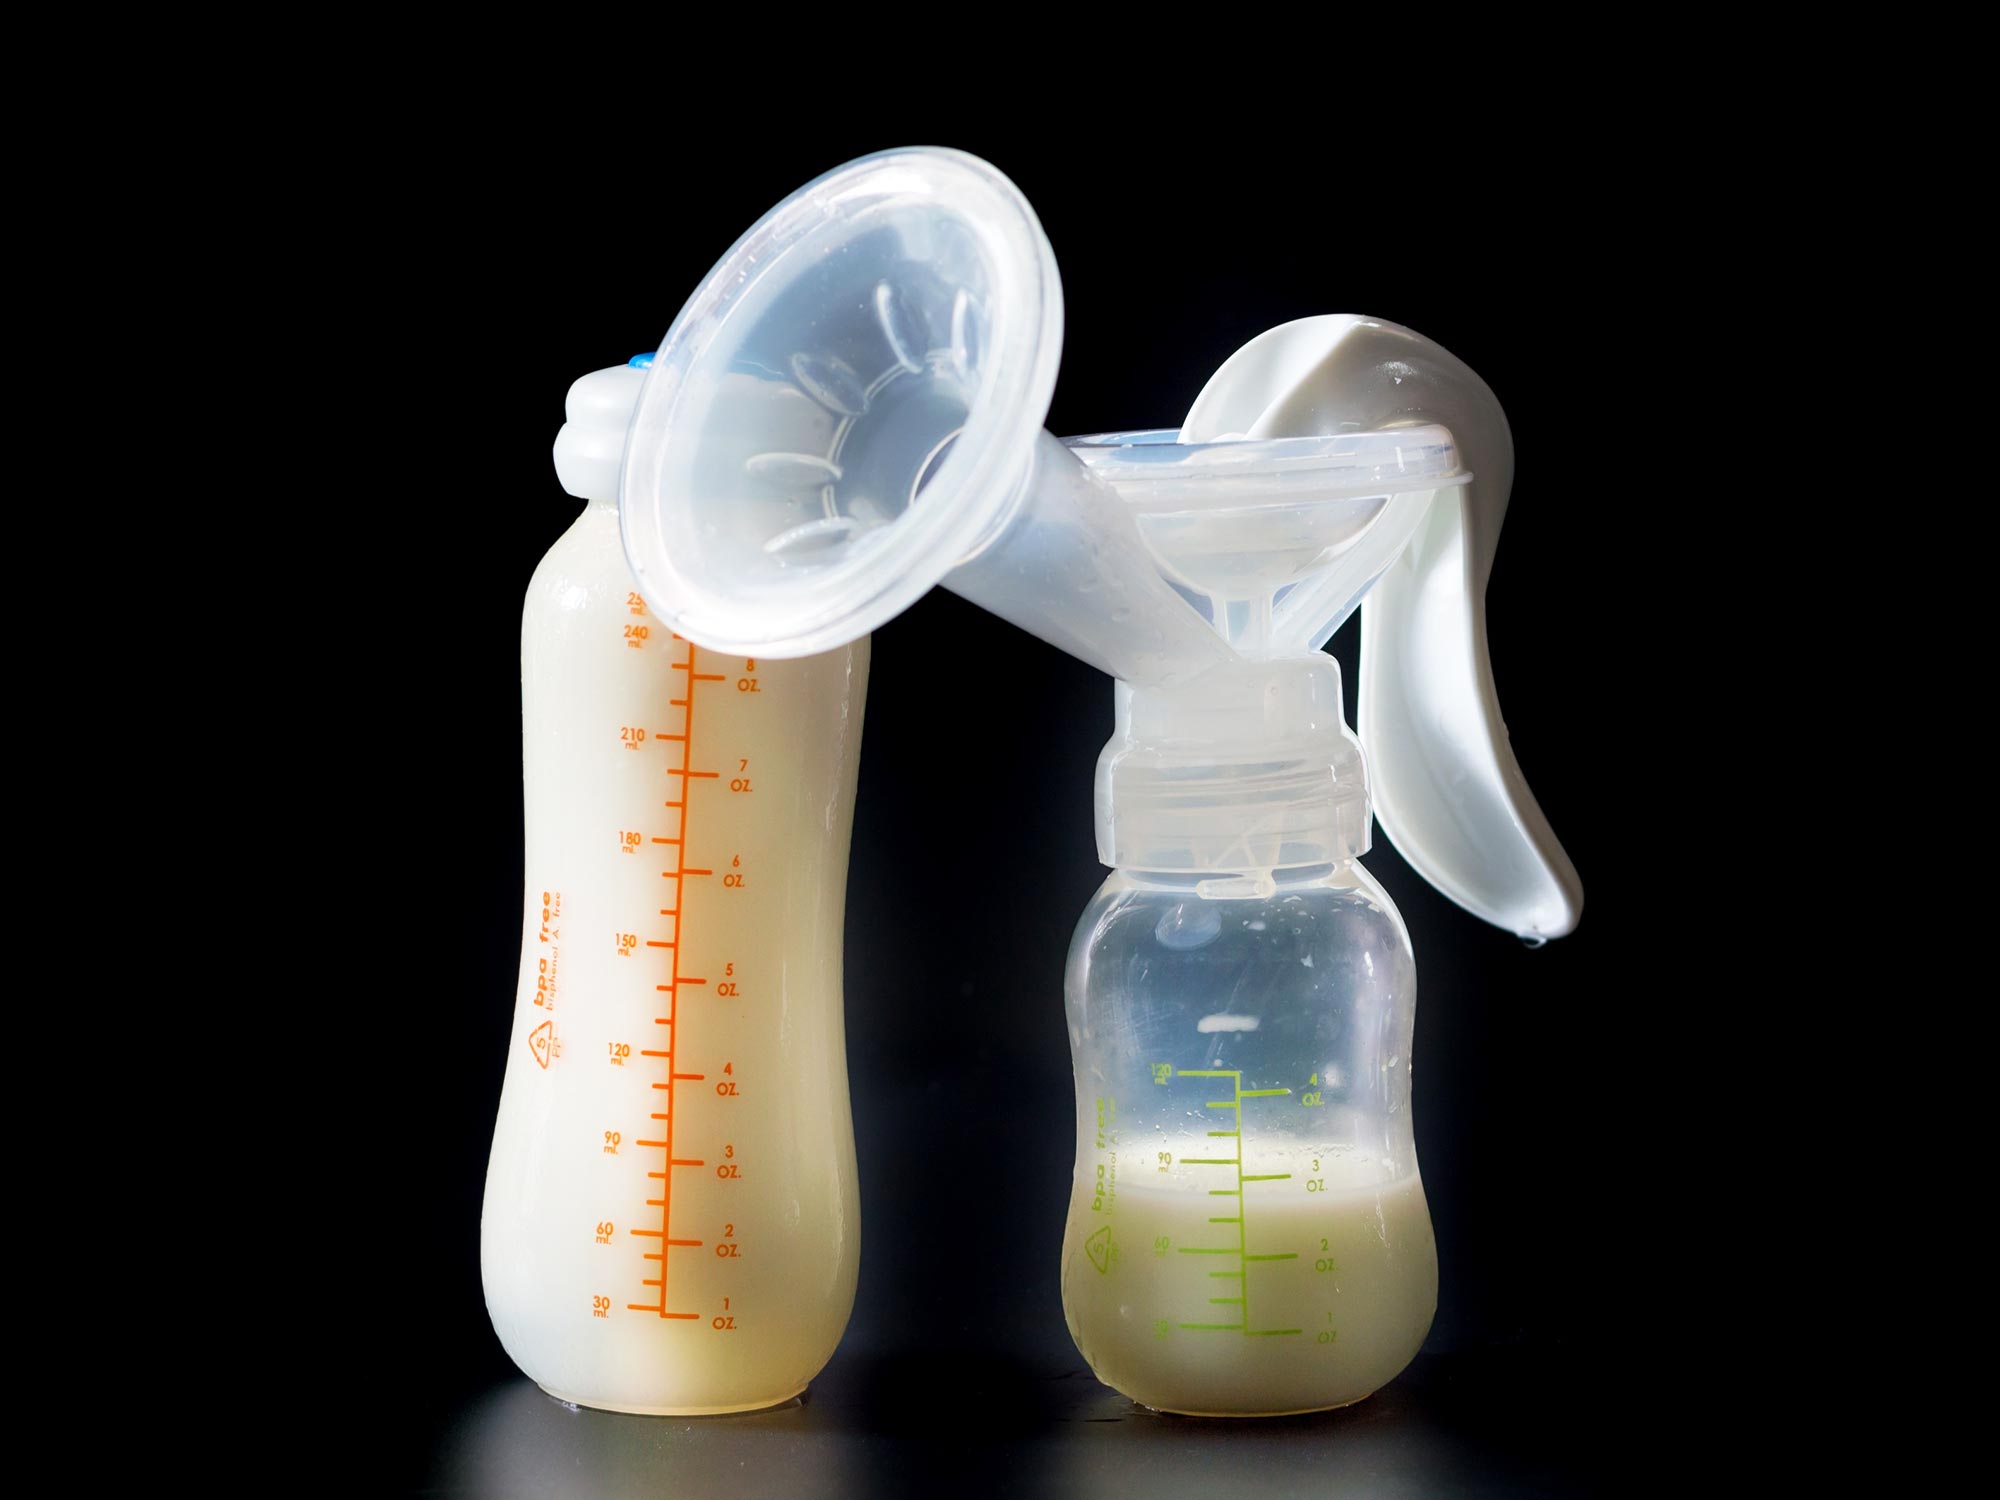 Living Cells Discovered In Human Breast Milk Could Aid Breast Cancer